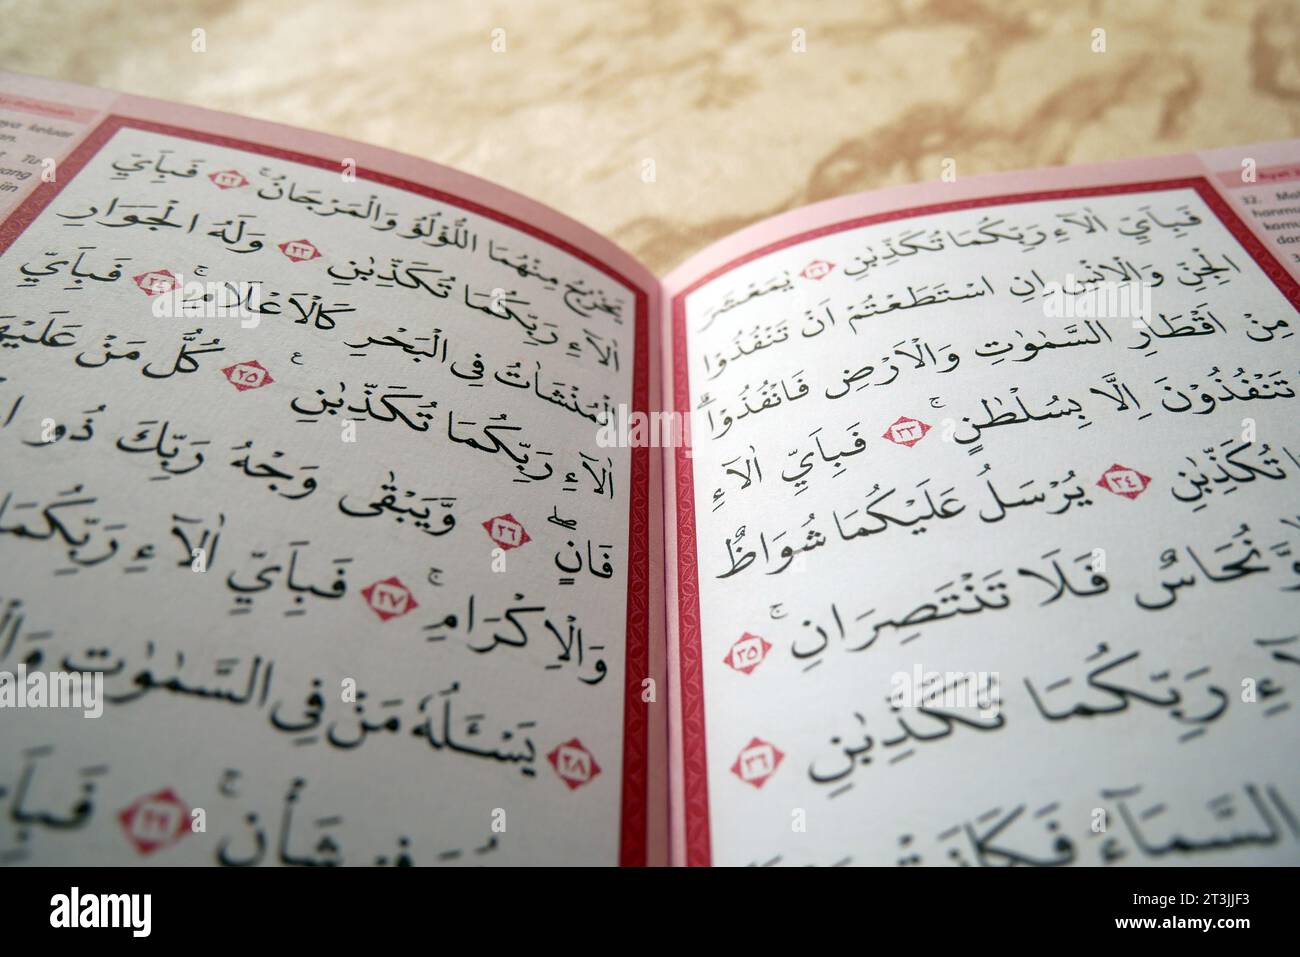 Man's hand flips open page of Quran on black background. The Quran is the holy book of Islam for Muslims. Stock Photo